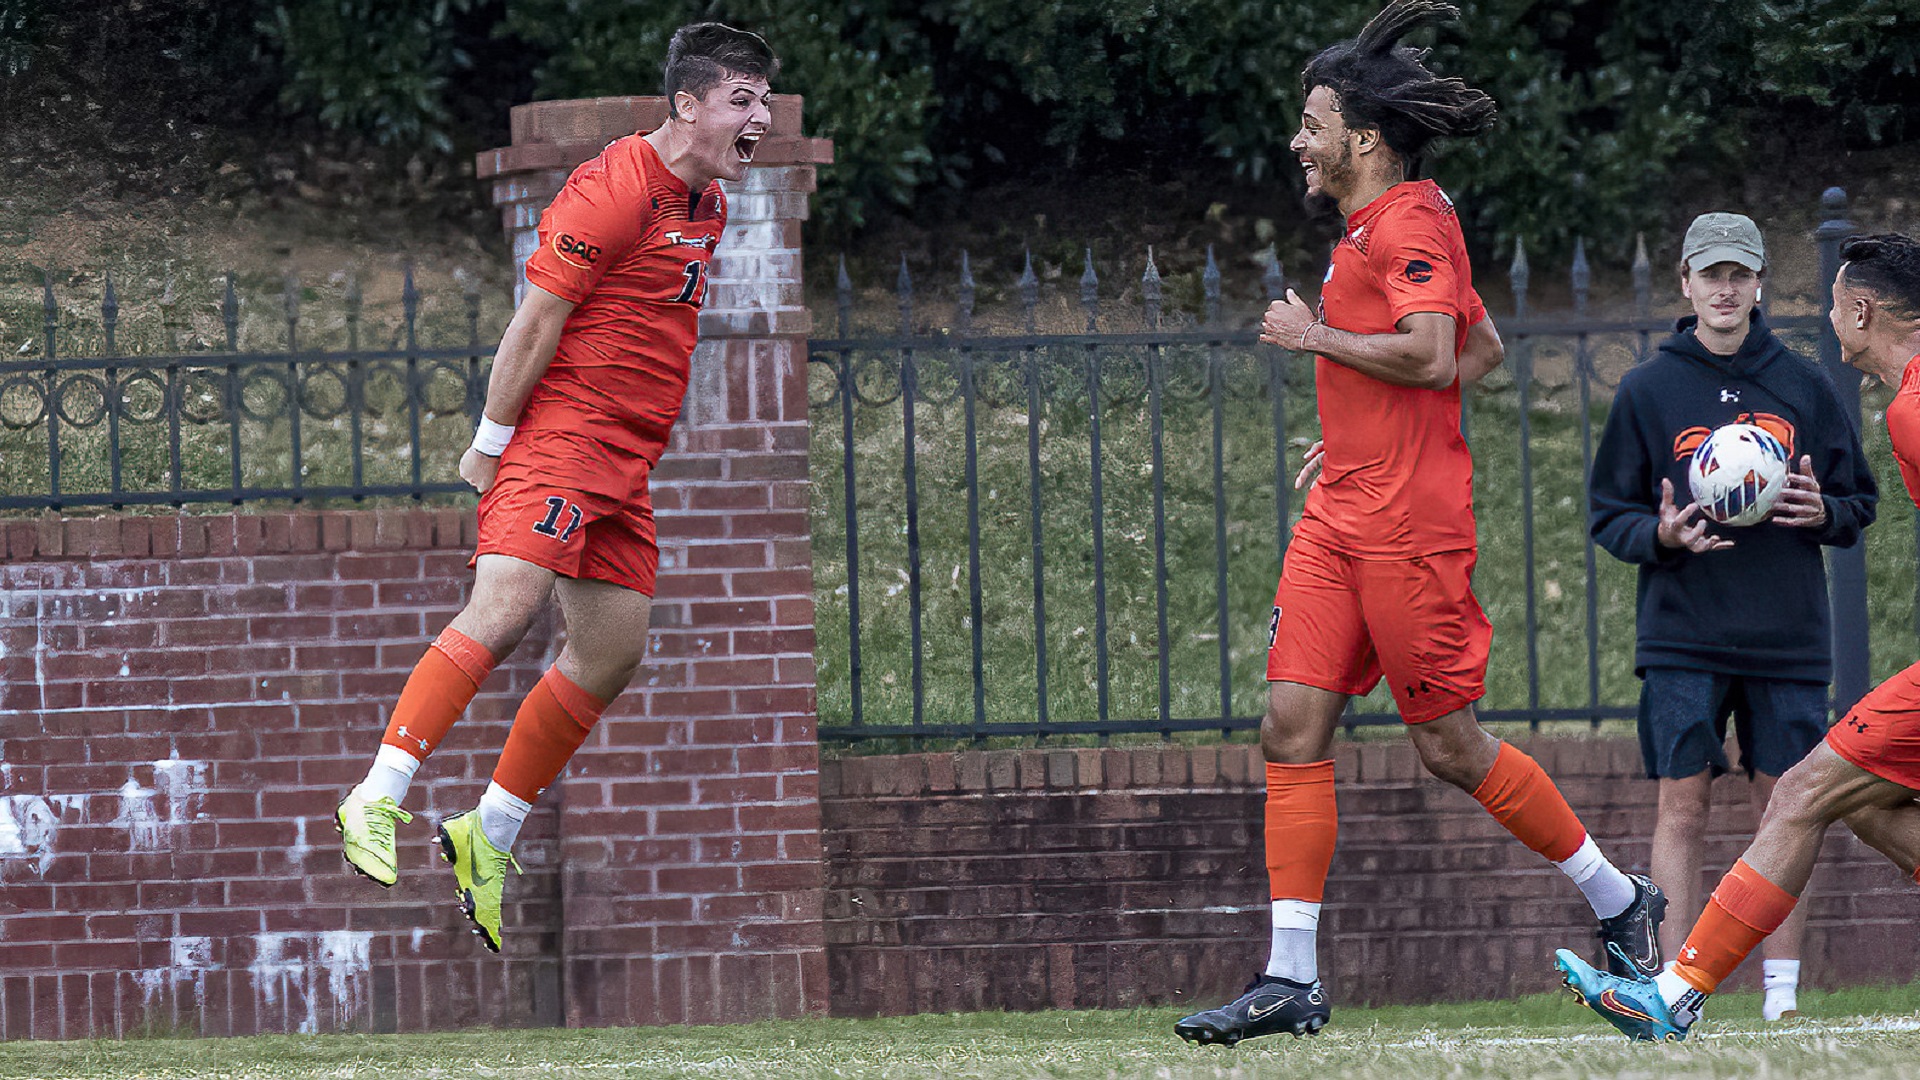 Luis De La Fuente (left) celebrates with Damien Baltide after his first-half goal against Newberry (photo by Chuck Williams)